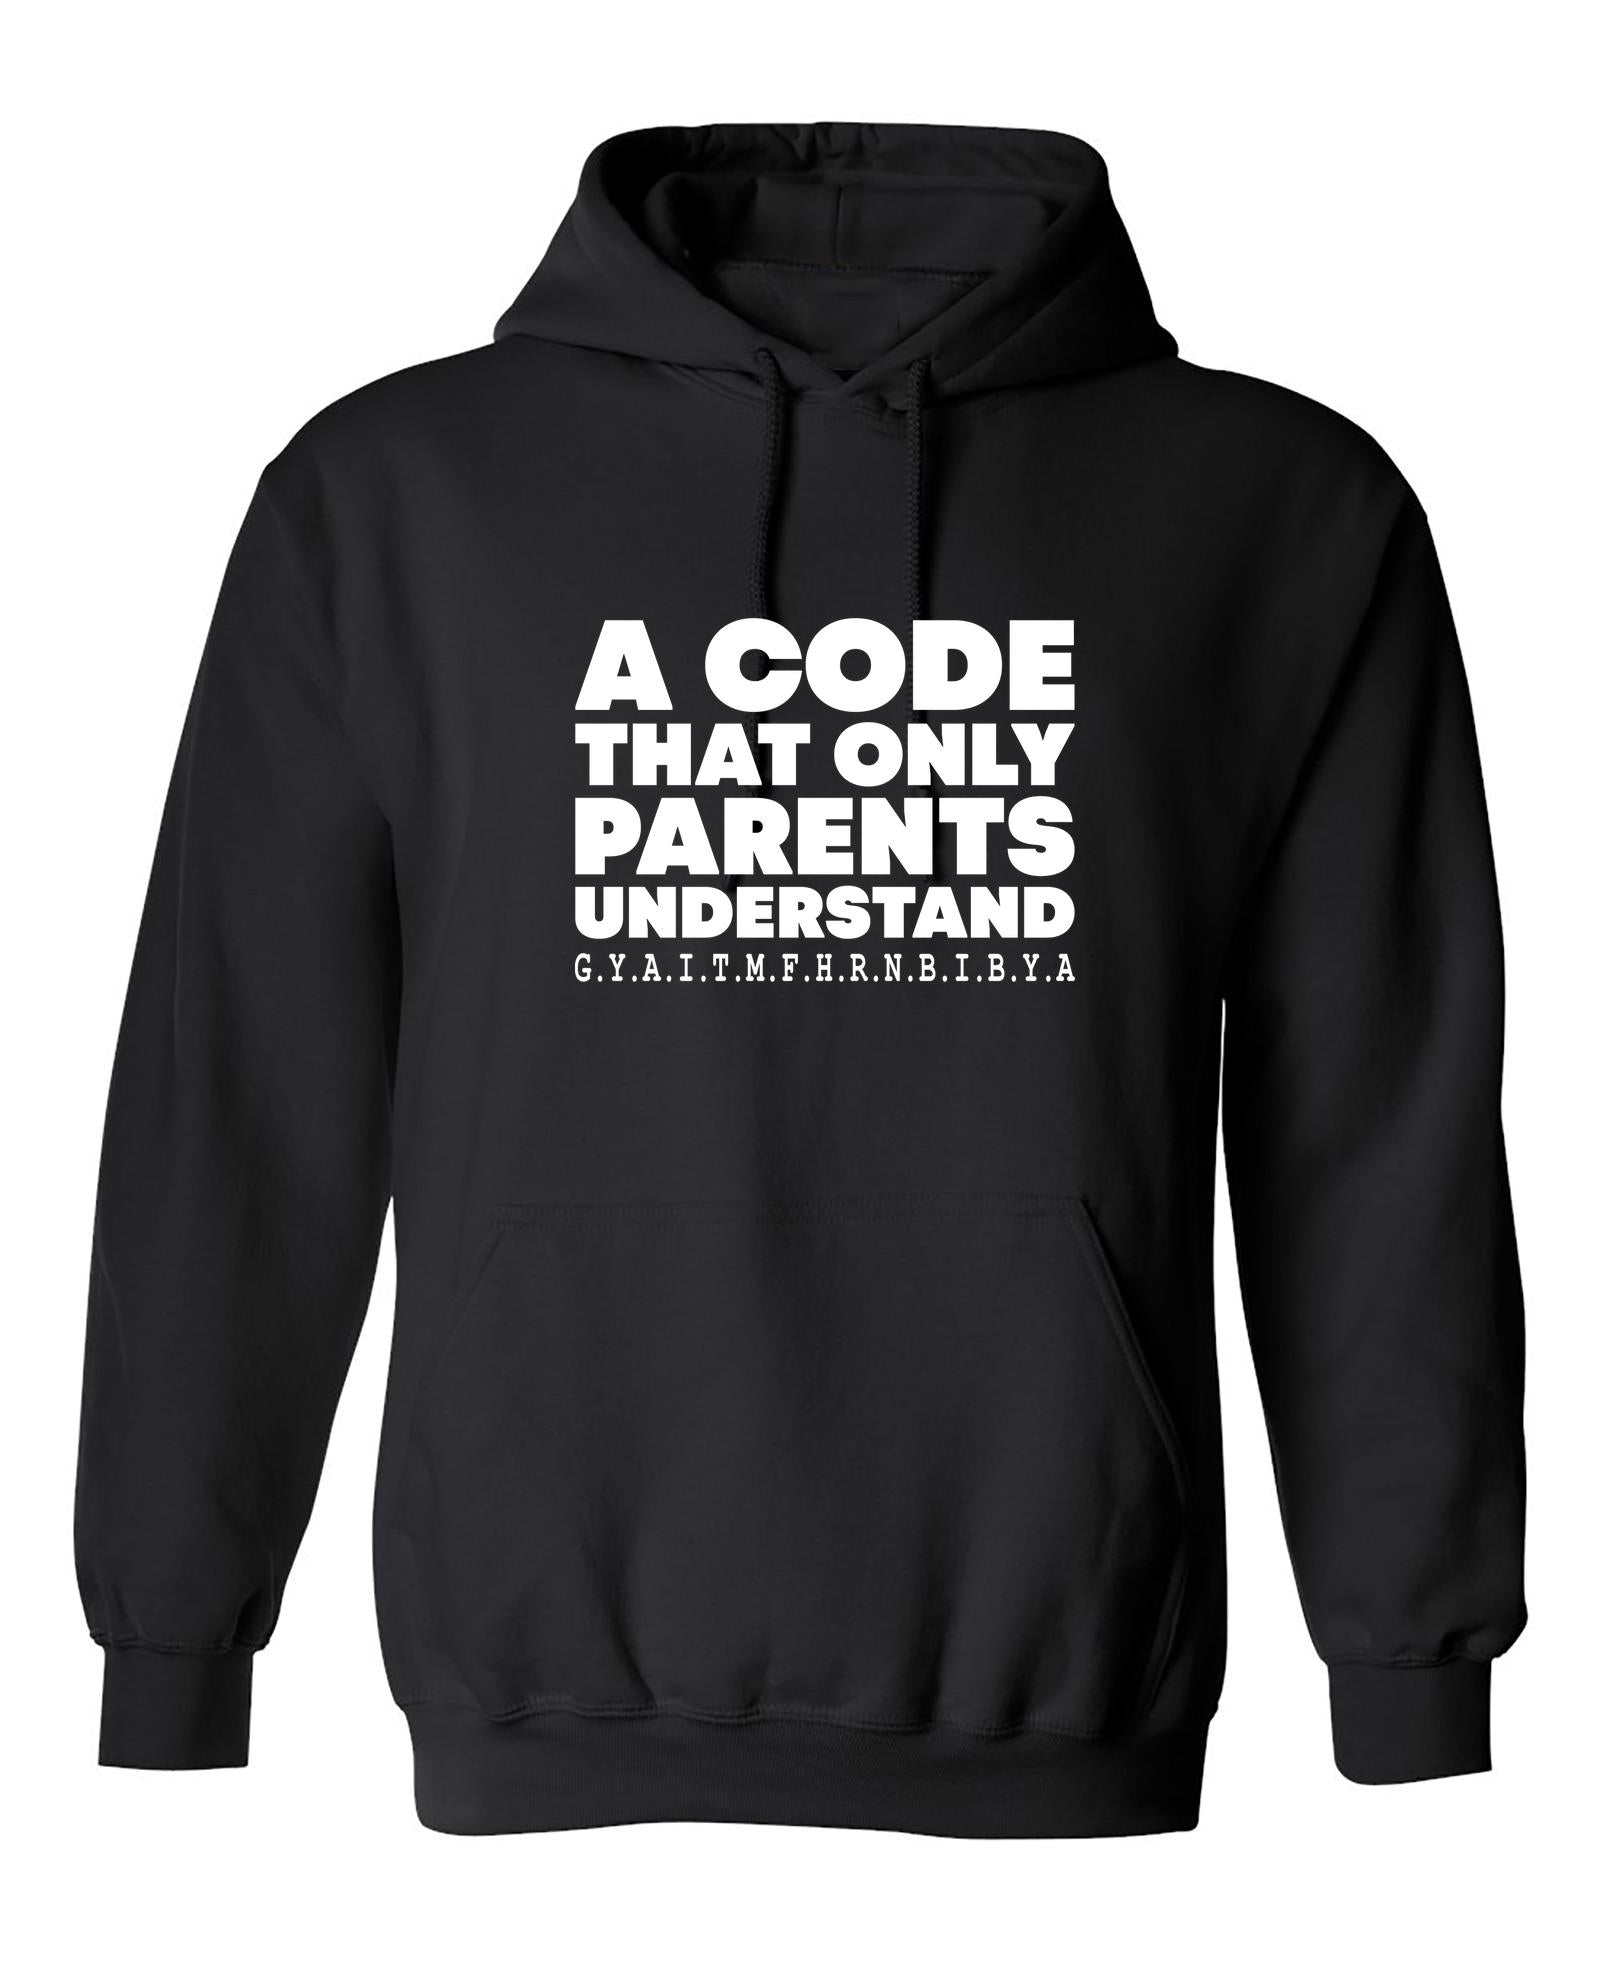 Funny T-Shirts design "A Code that Only Parents Understand"